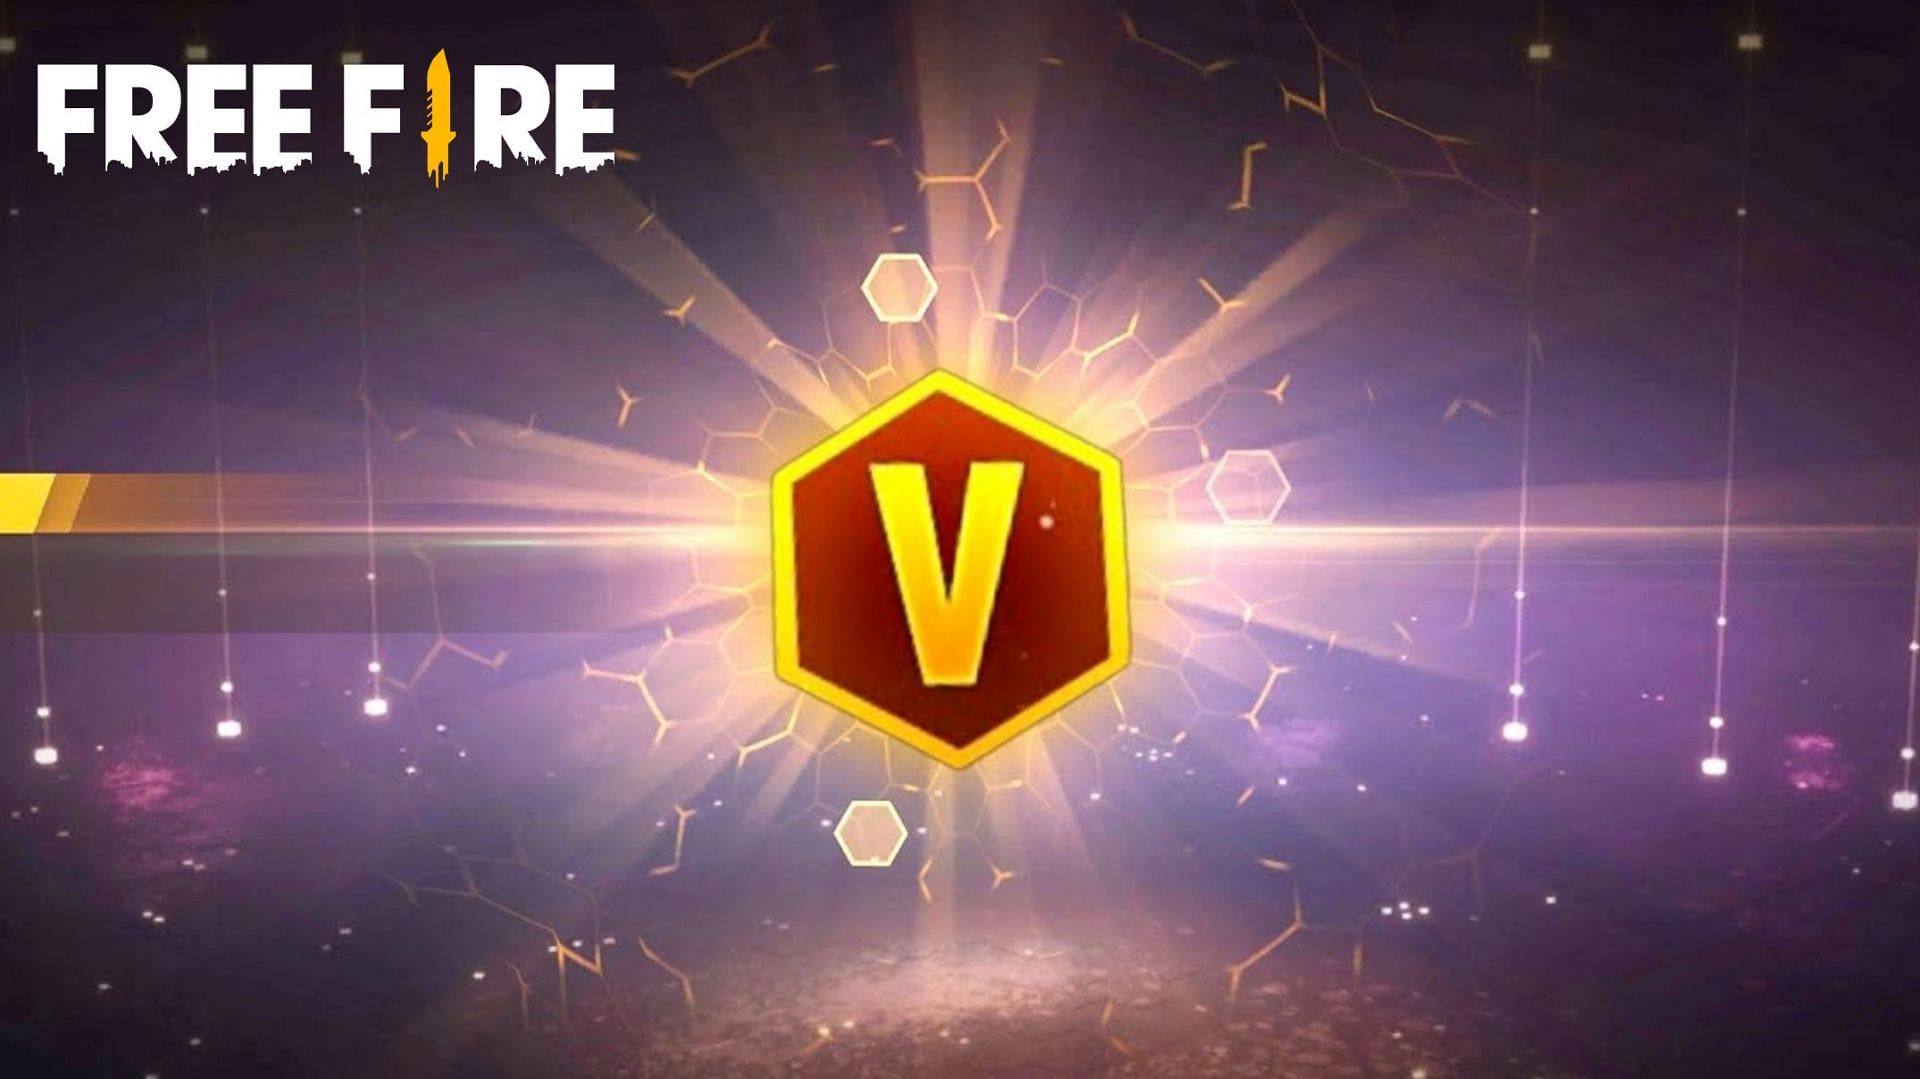 To get the V Badge, users must join the official Free Fire Partner Program (Image via Sportskeeda)